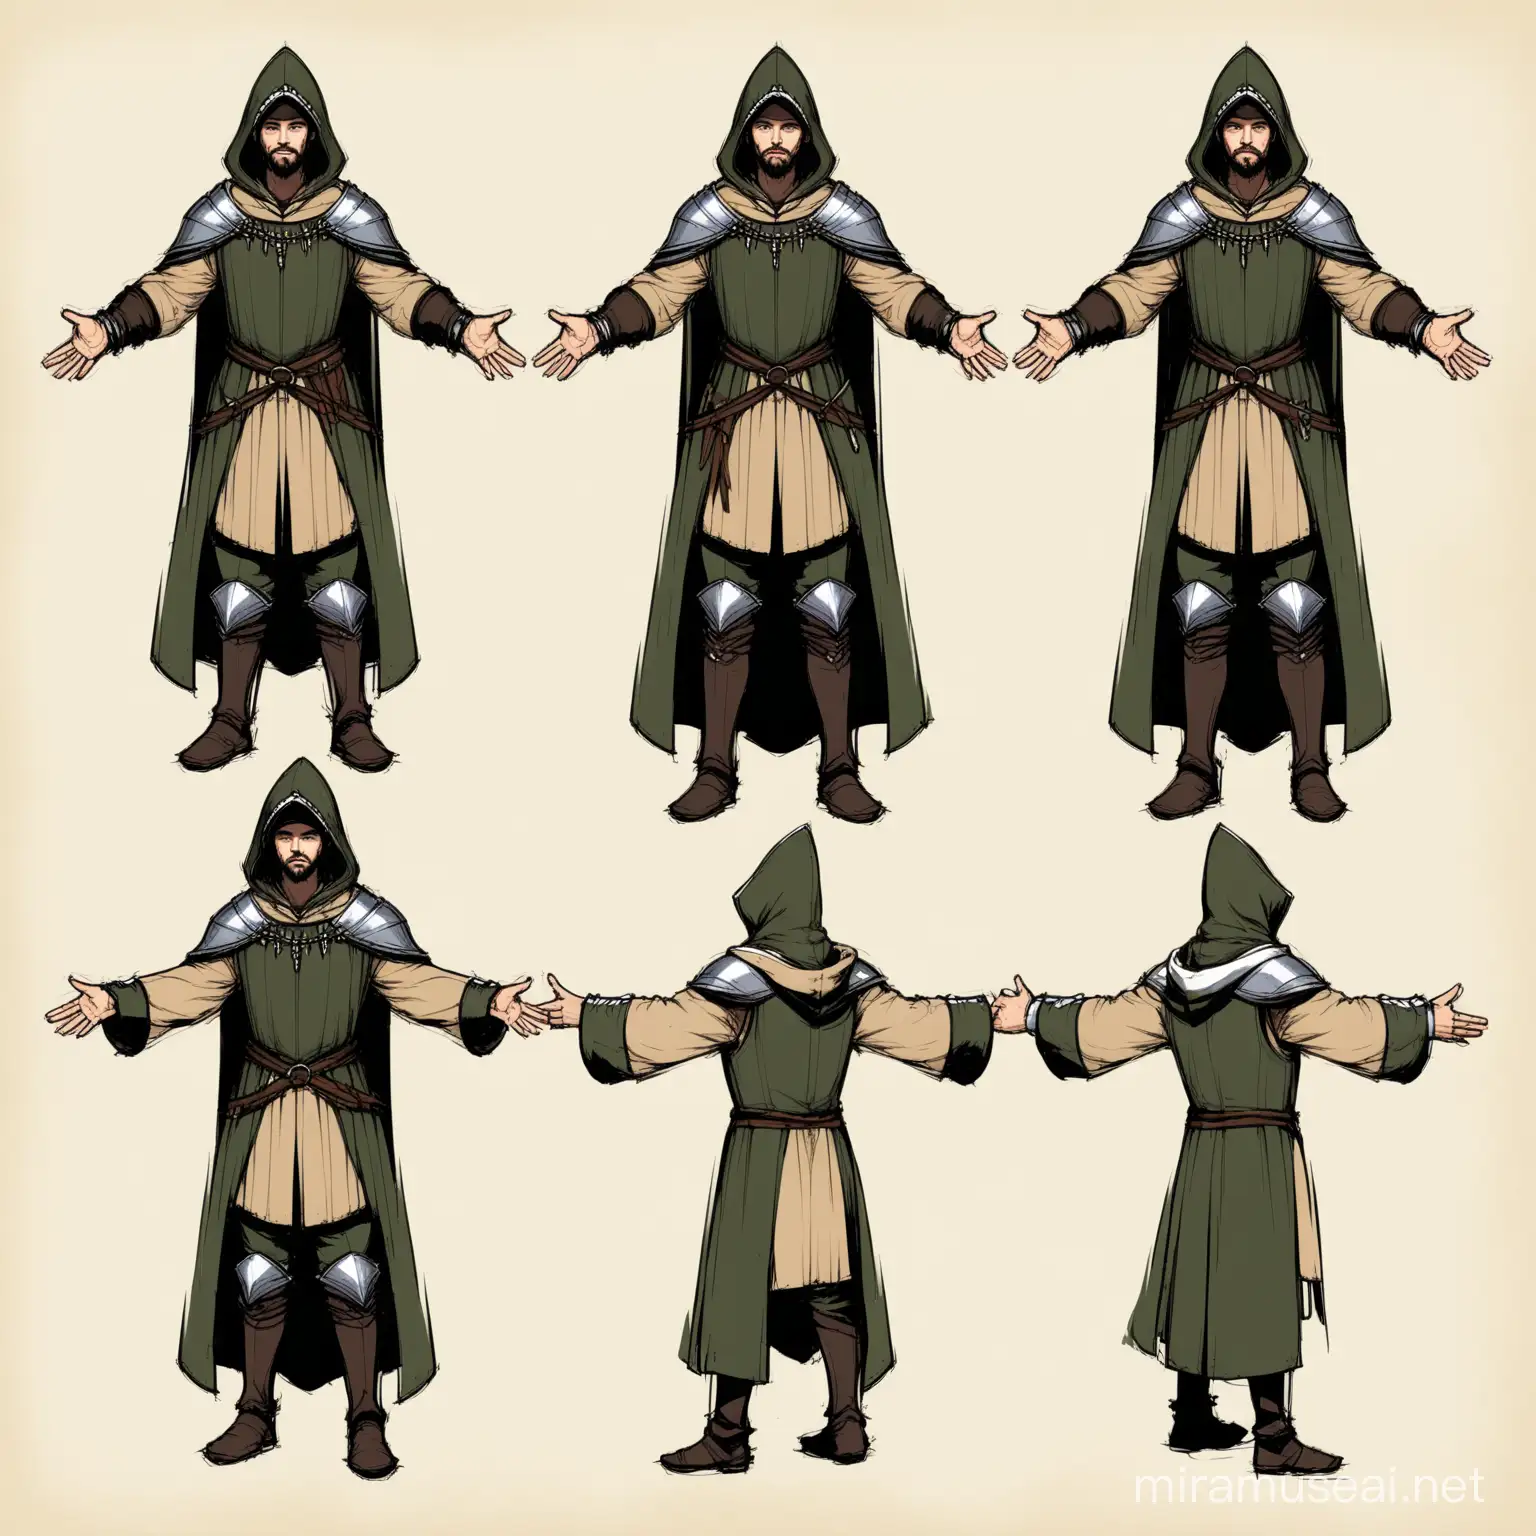 Medieval Male Outfit Concept Art Hooded Figure with Outstretched Hands